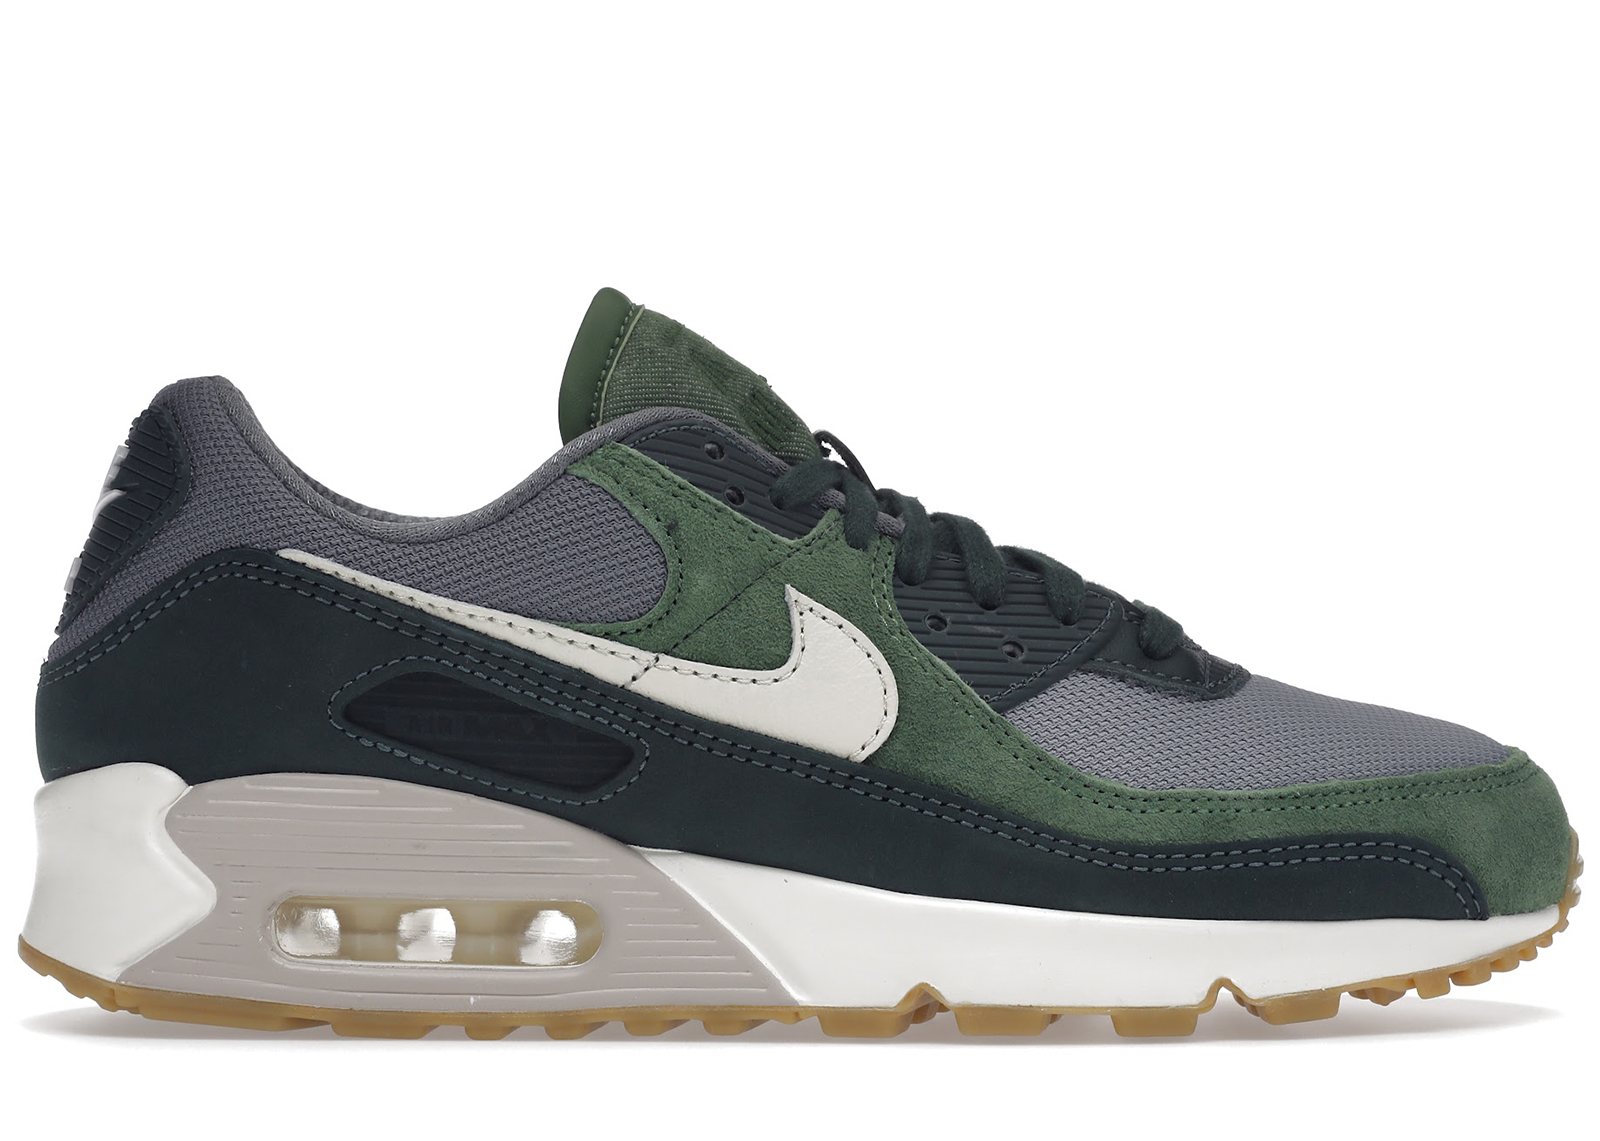 Nike Air Max 90 PRM Pro Green Pale Ivory メンズ - DH4621-300 - JP